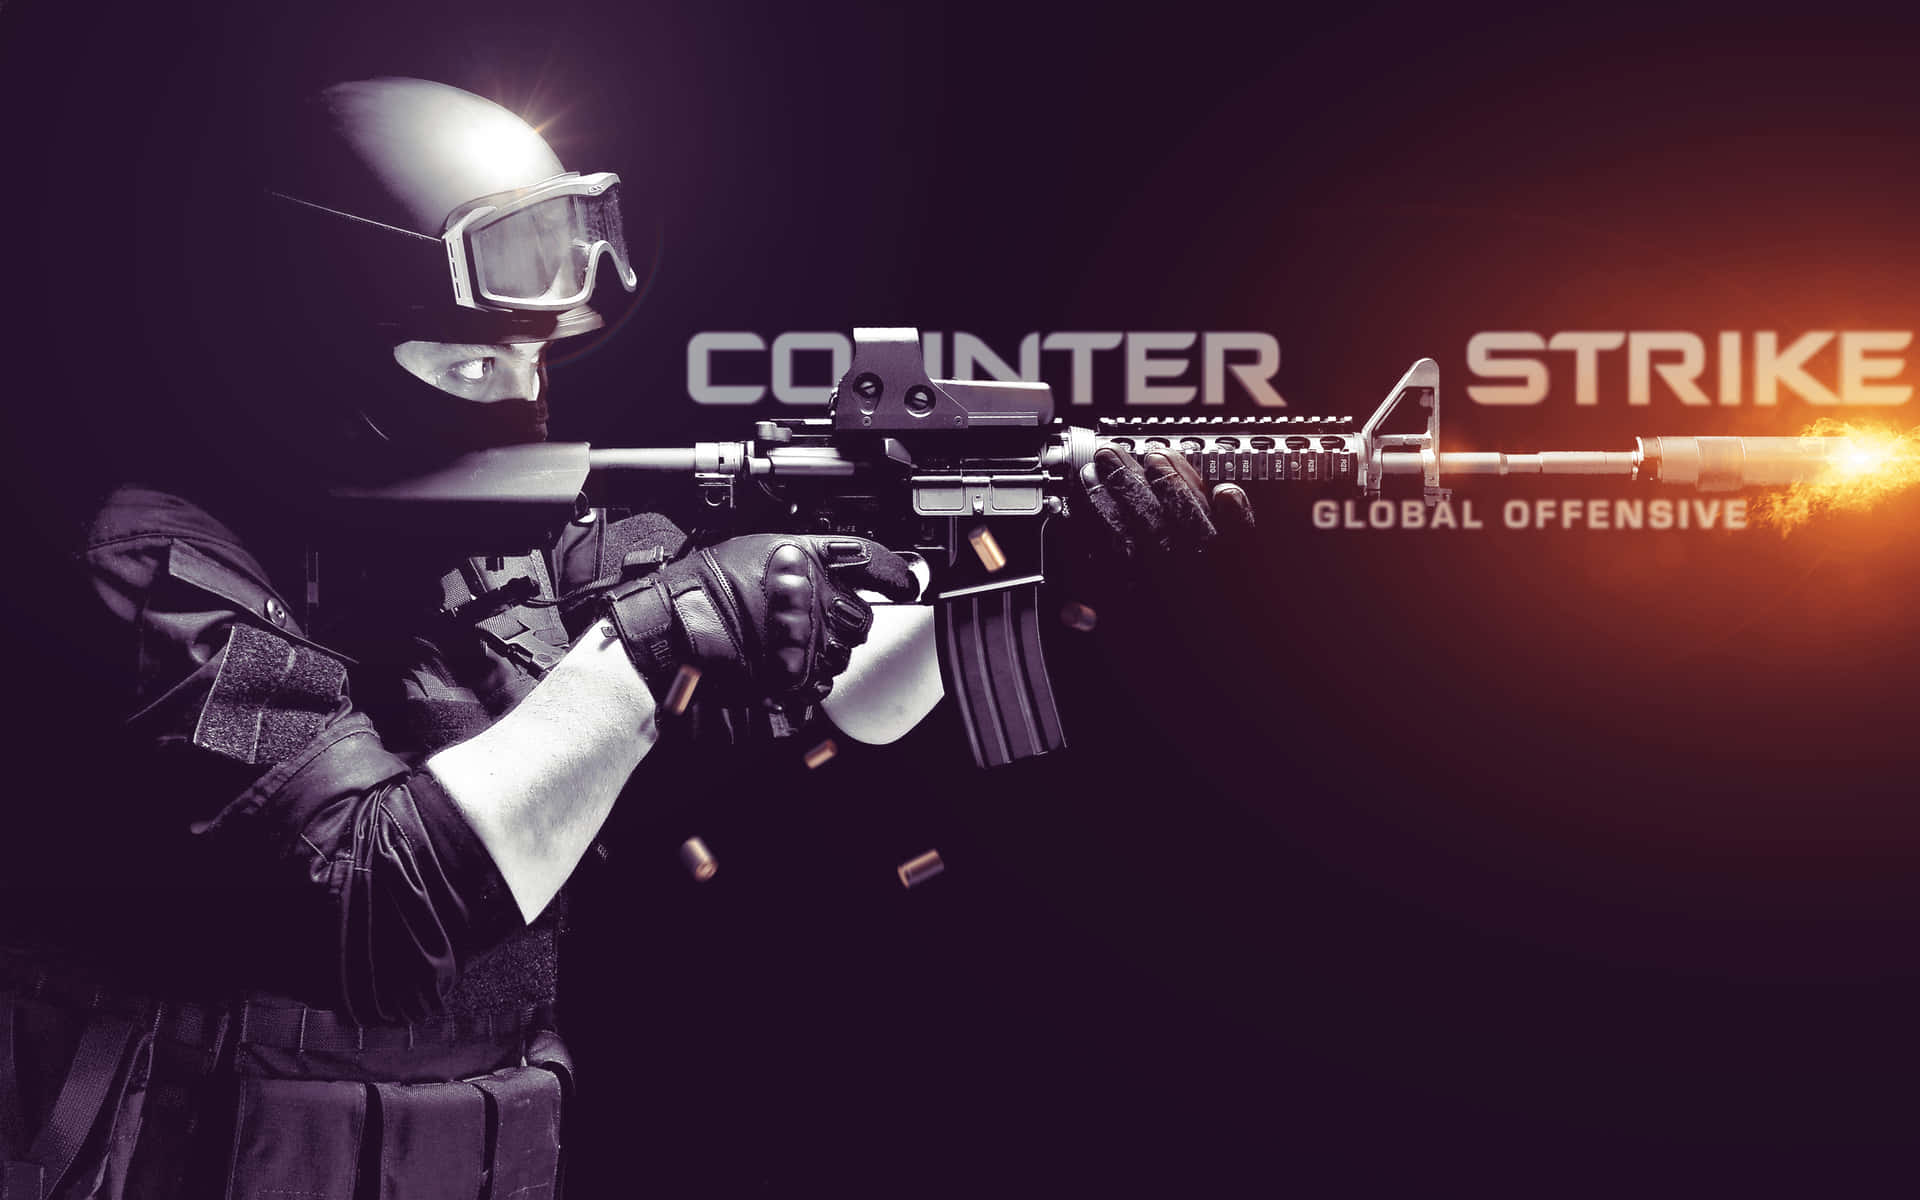 Cool Counterstrike Global Offensive Poster Wallpaper